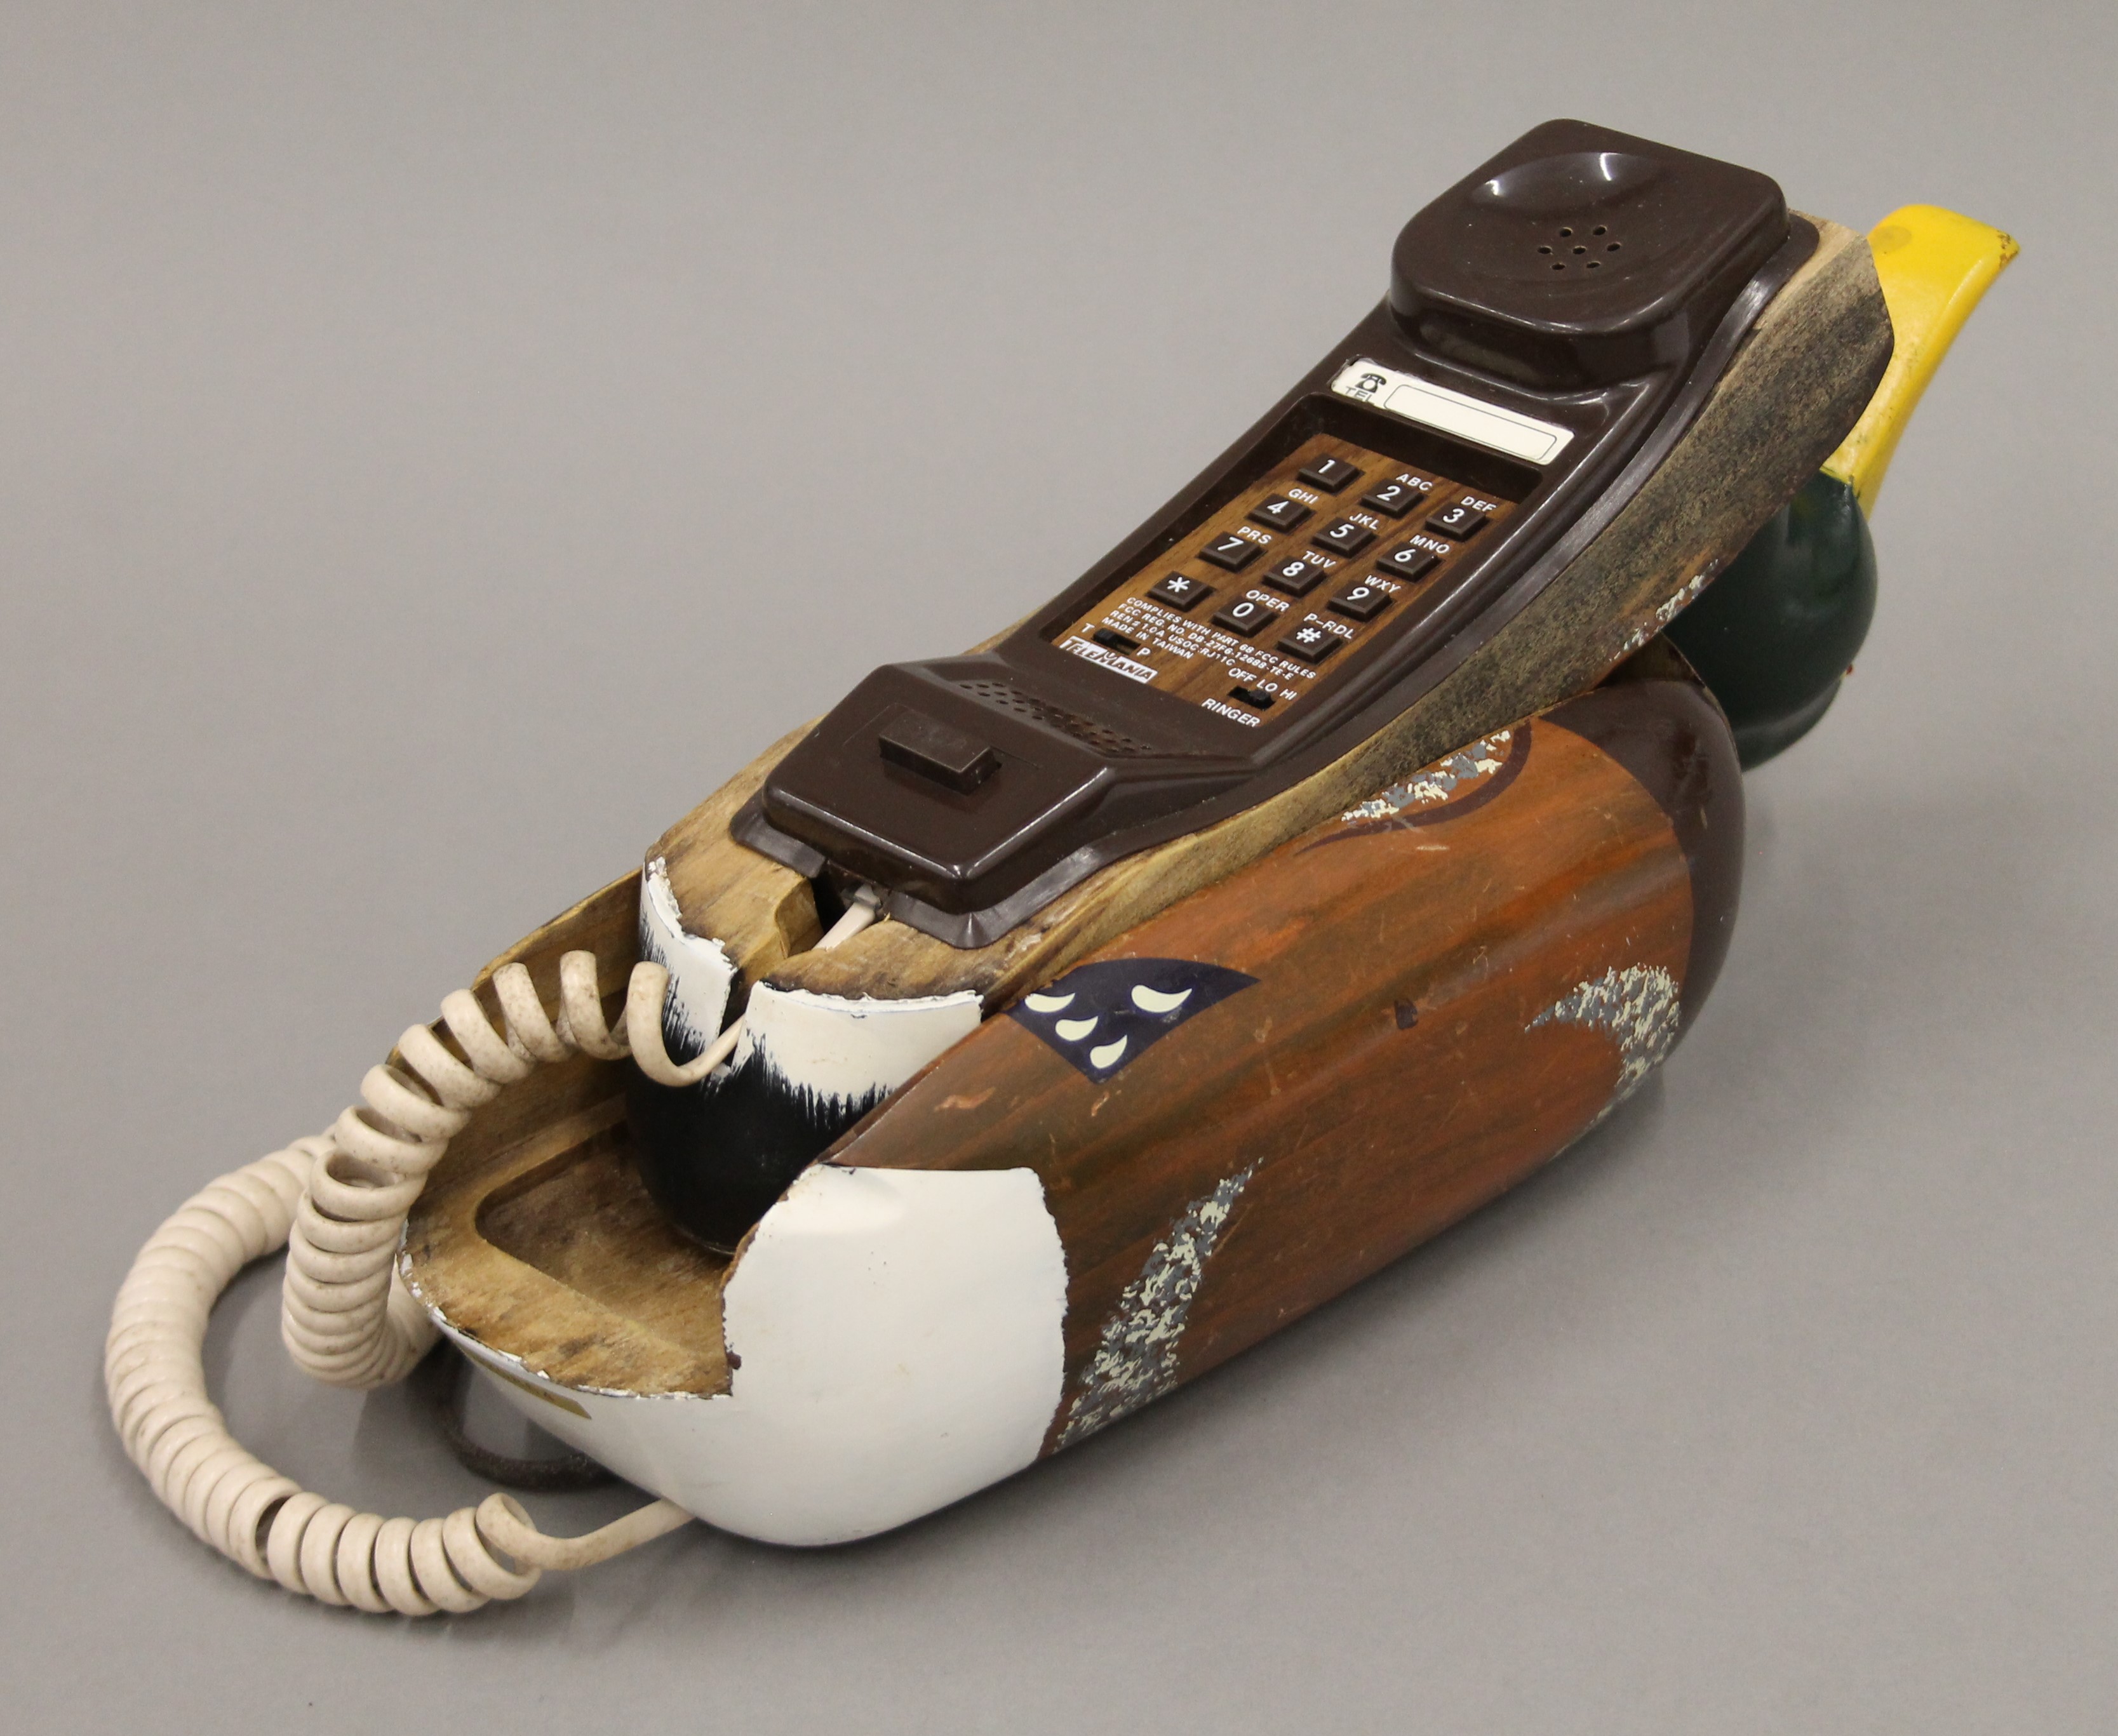 Two duck form telephones. - Image 3 of 3